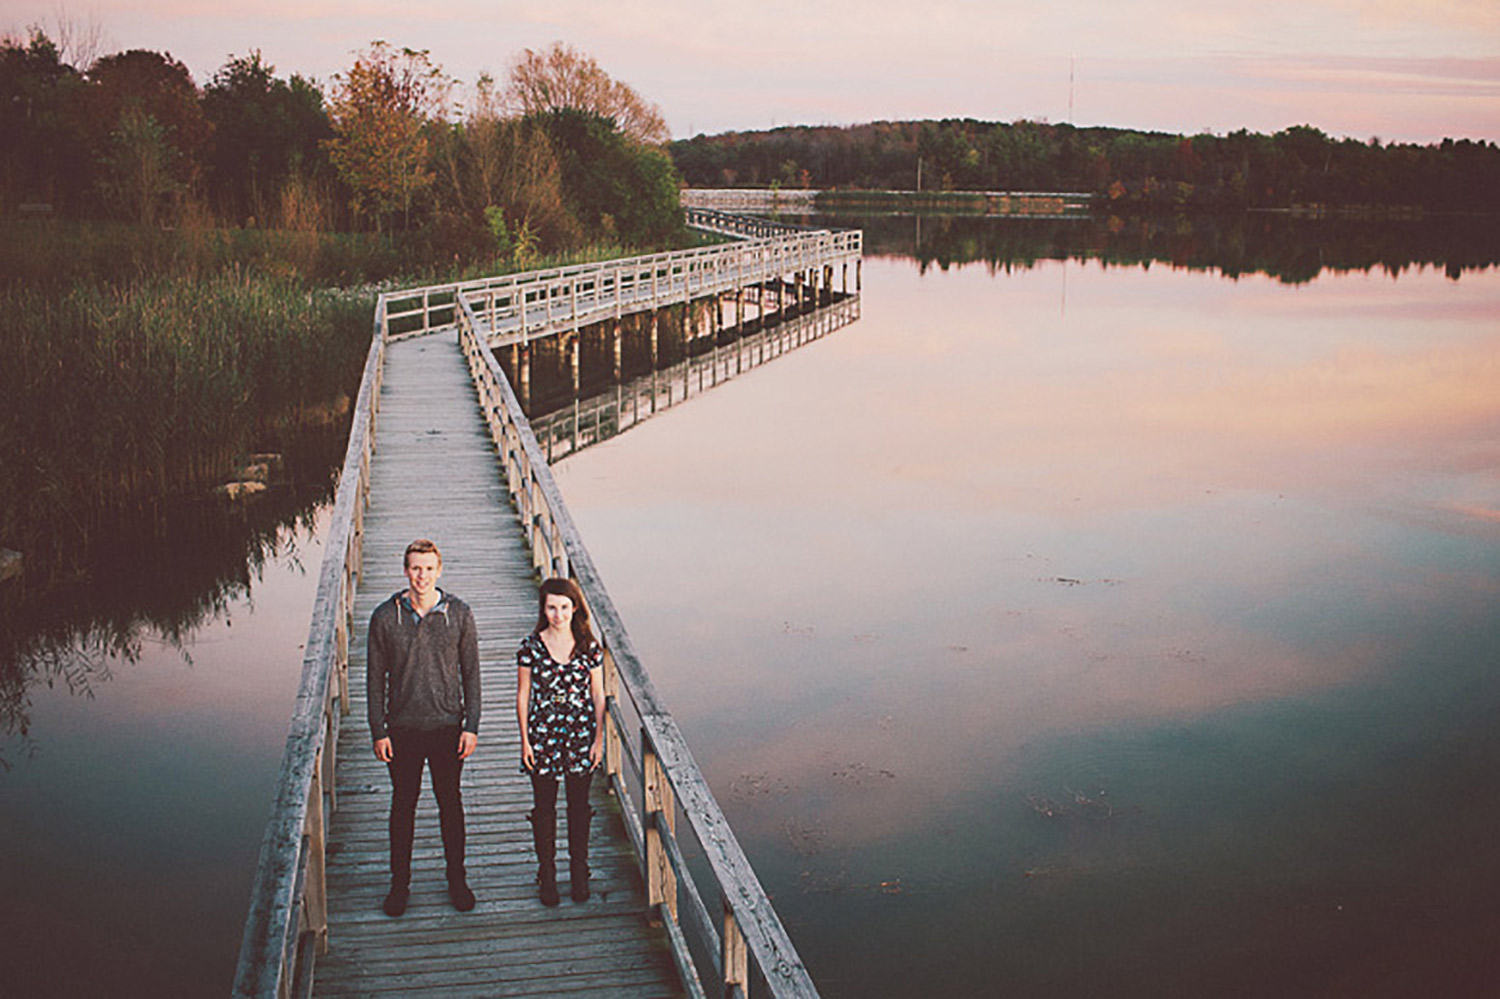 Waterfront-Gibson-Lake-Engagement-Vineyard-Bride-Photo-By-Reed-Photography-020.jpg